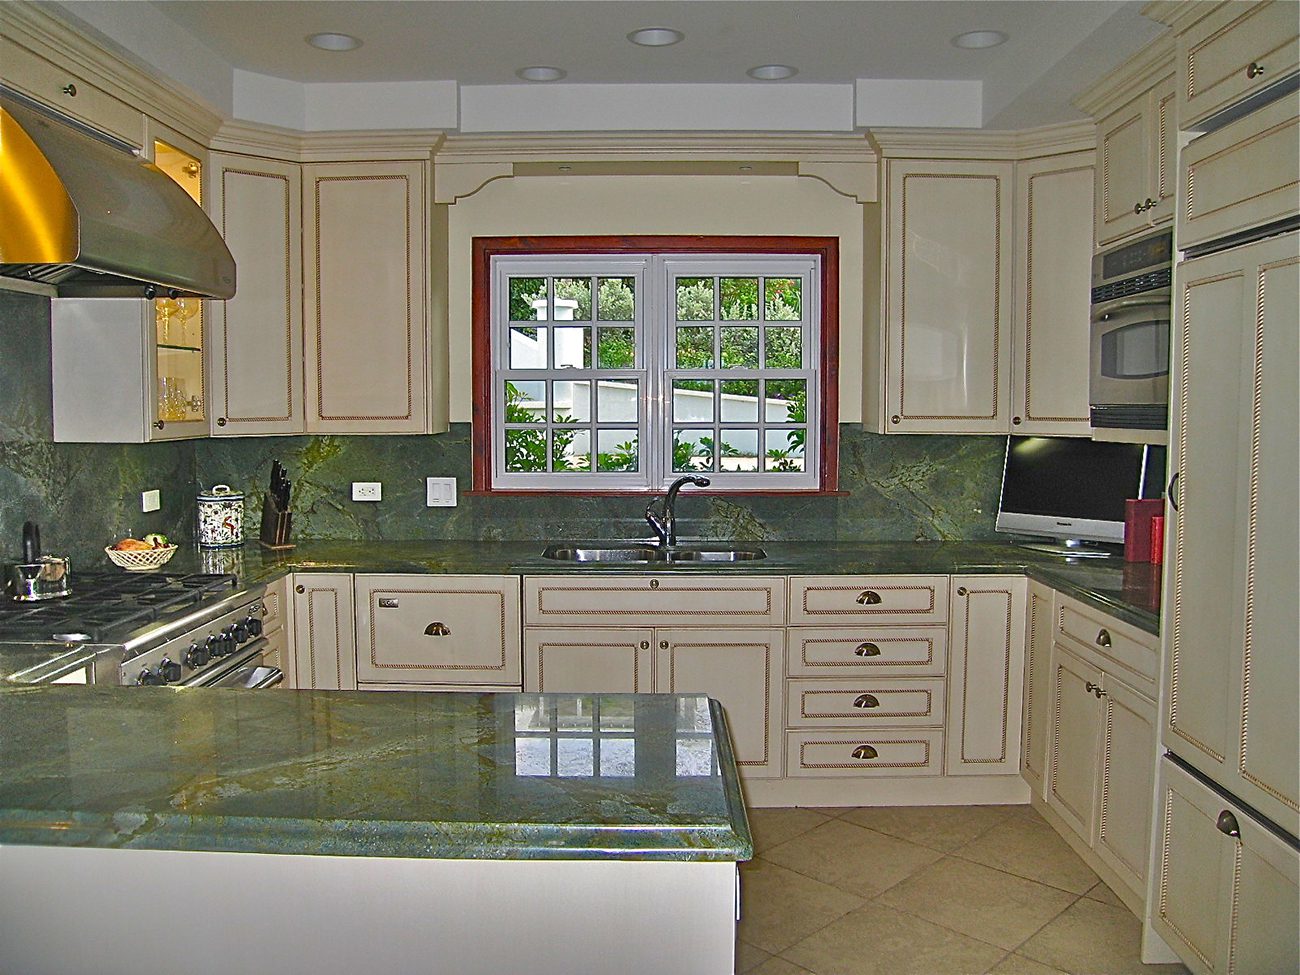 A kitchen with green marble counter tops and white cabinets.